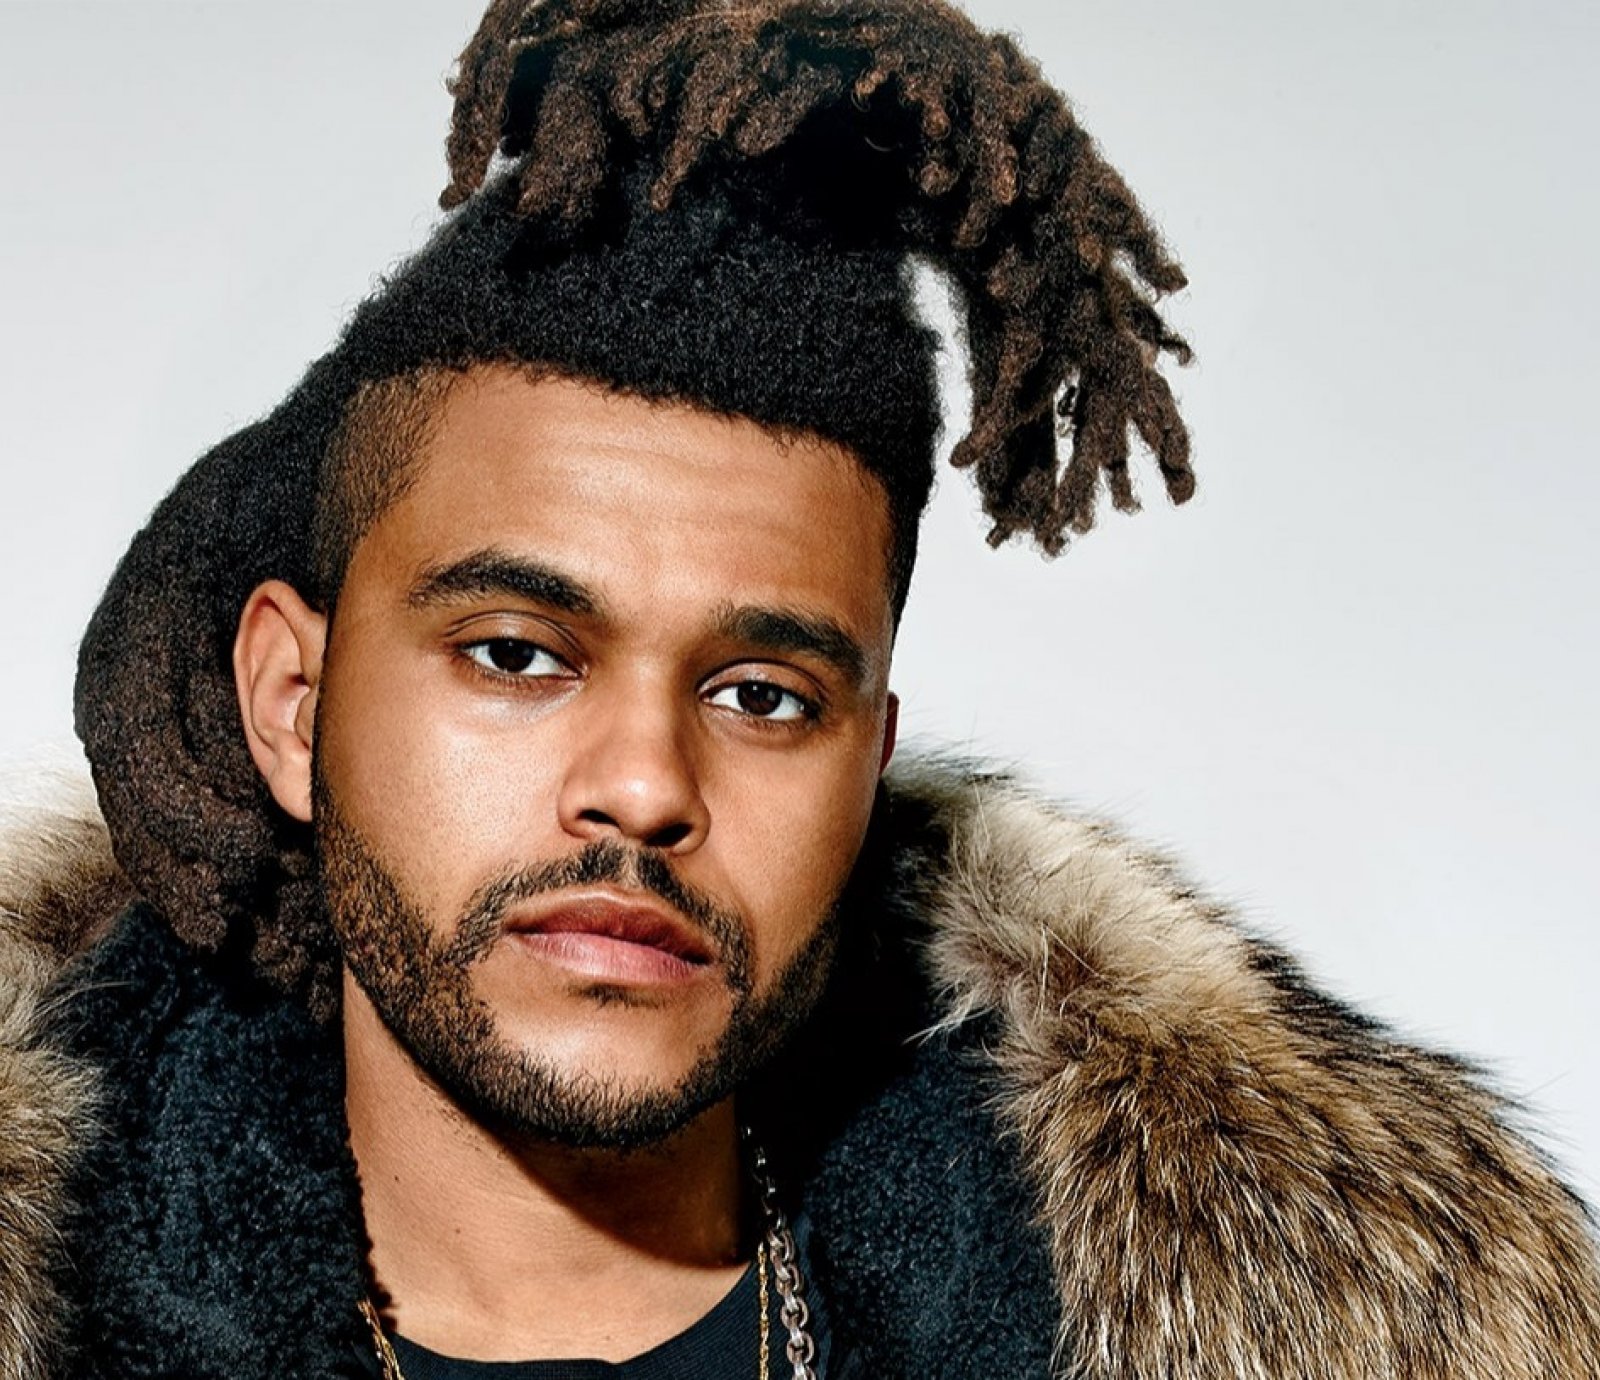 Thinking about the weekend. The Weeknd. The Weeknd фото. The Weeknd 2015. Эйбел Макконен Тесфайе.